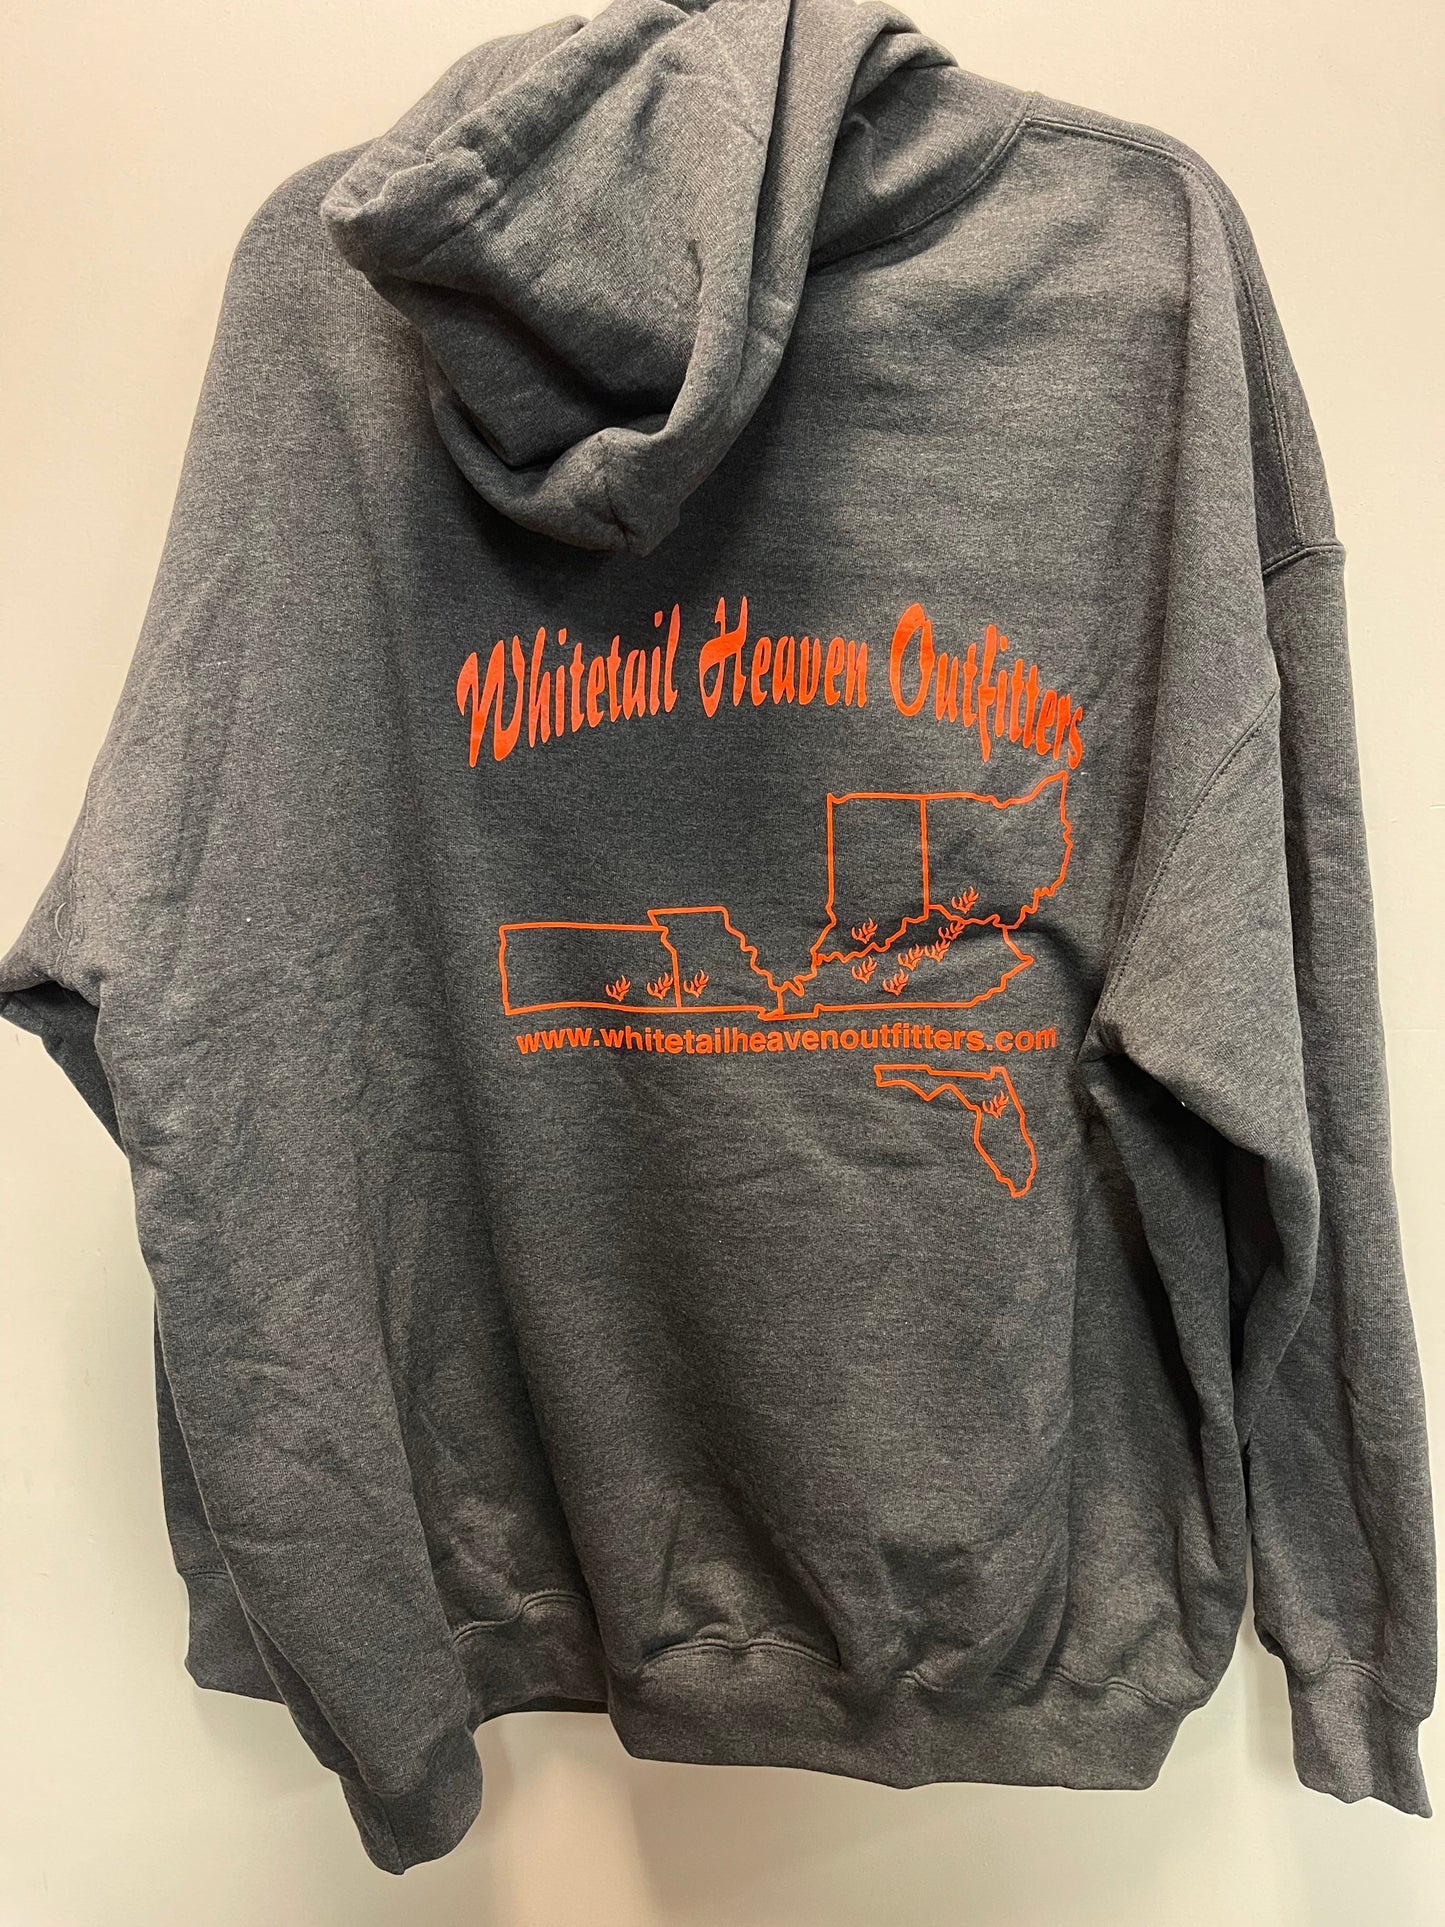 NEW EDITION GRAY AND ORANGE WHITETAIL HEAVEN HOODIE